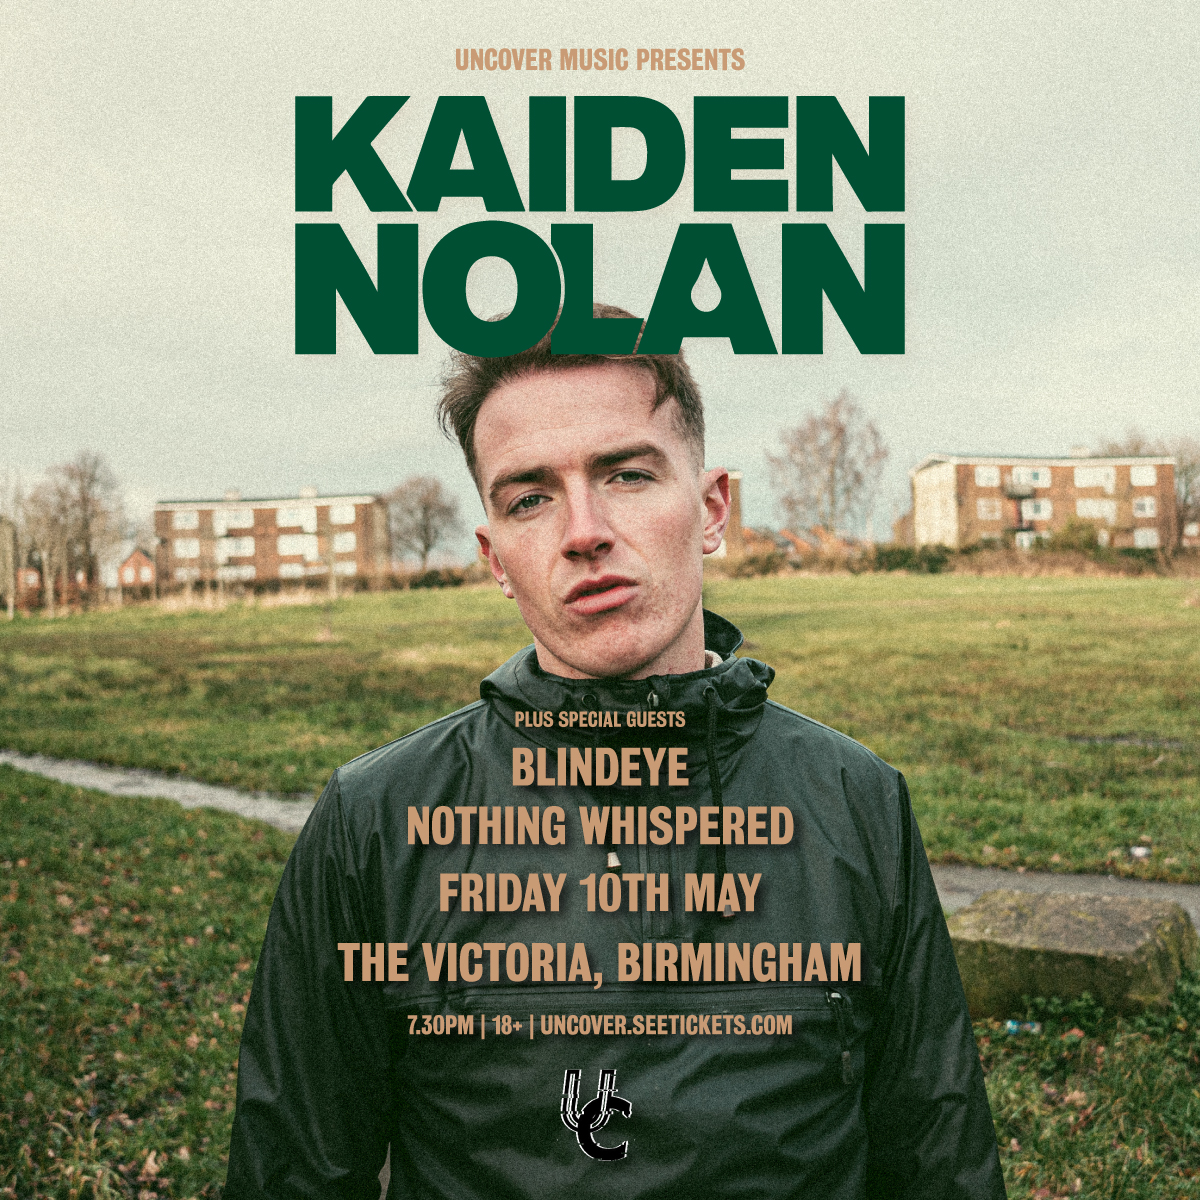 ONE WEEK TO GO 💙 Indie rock/funk singer-songwriter @KaidenNolan headlines @TheVictoria, Birmingham on Friday, 10th May, with special guests BLNDEYE and Nothing Whispered 💥 Tickets on sale now: bit.ly/3TBwjav